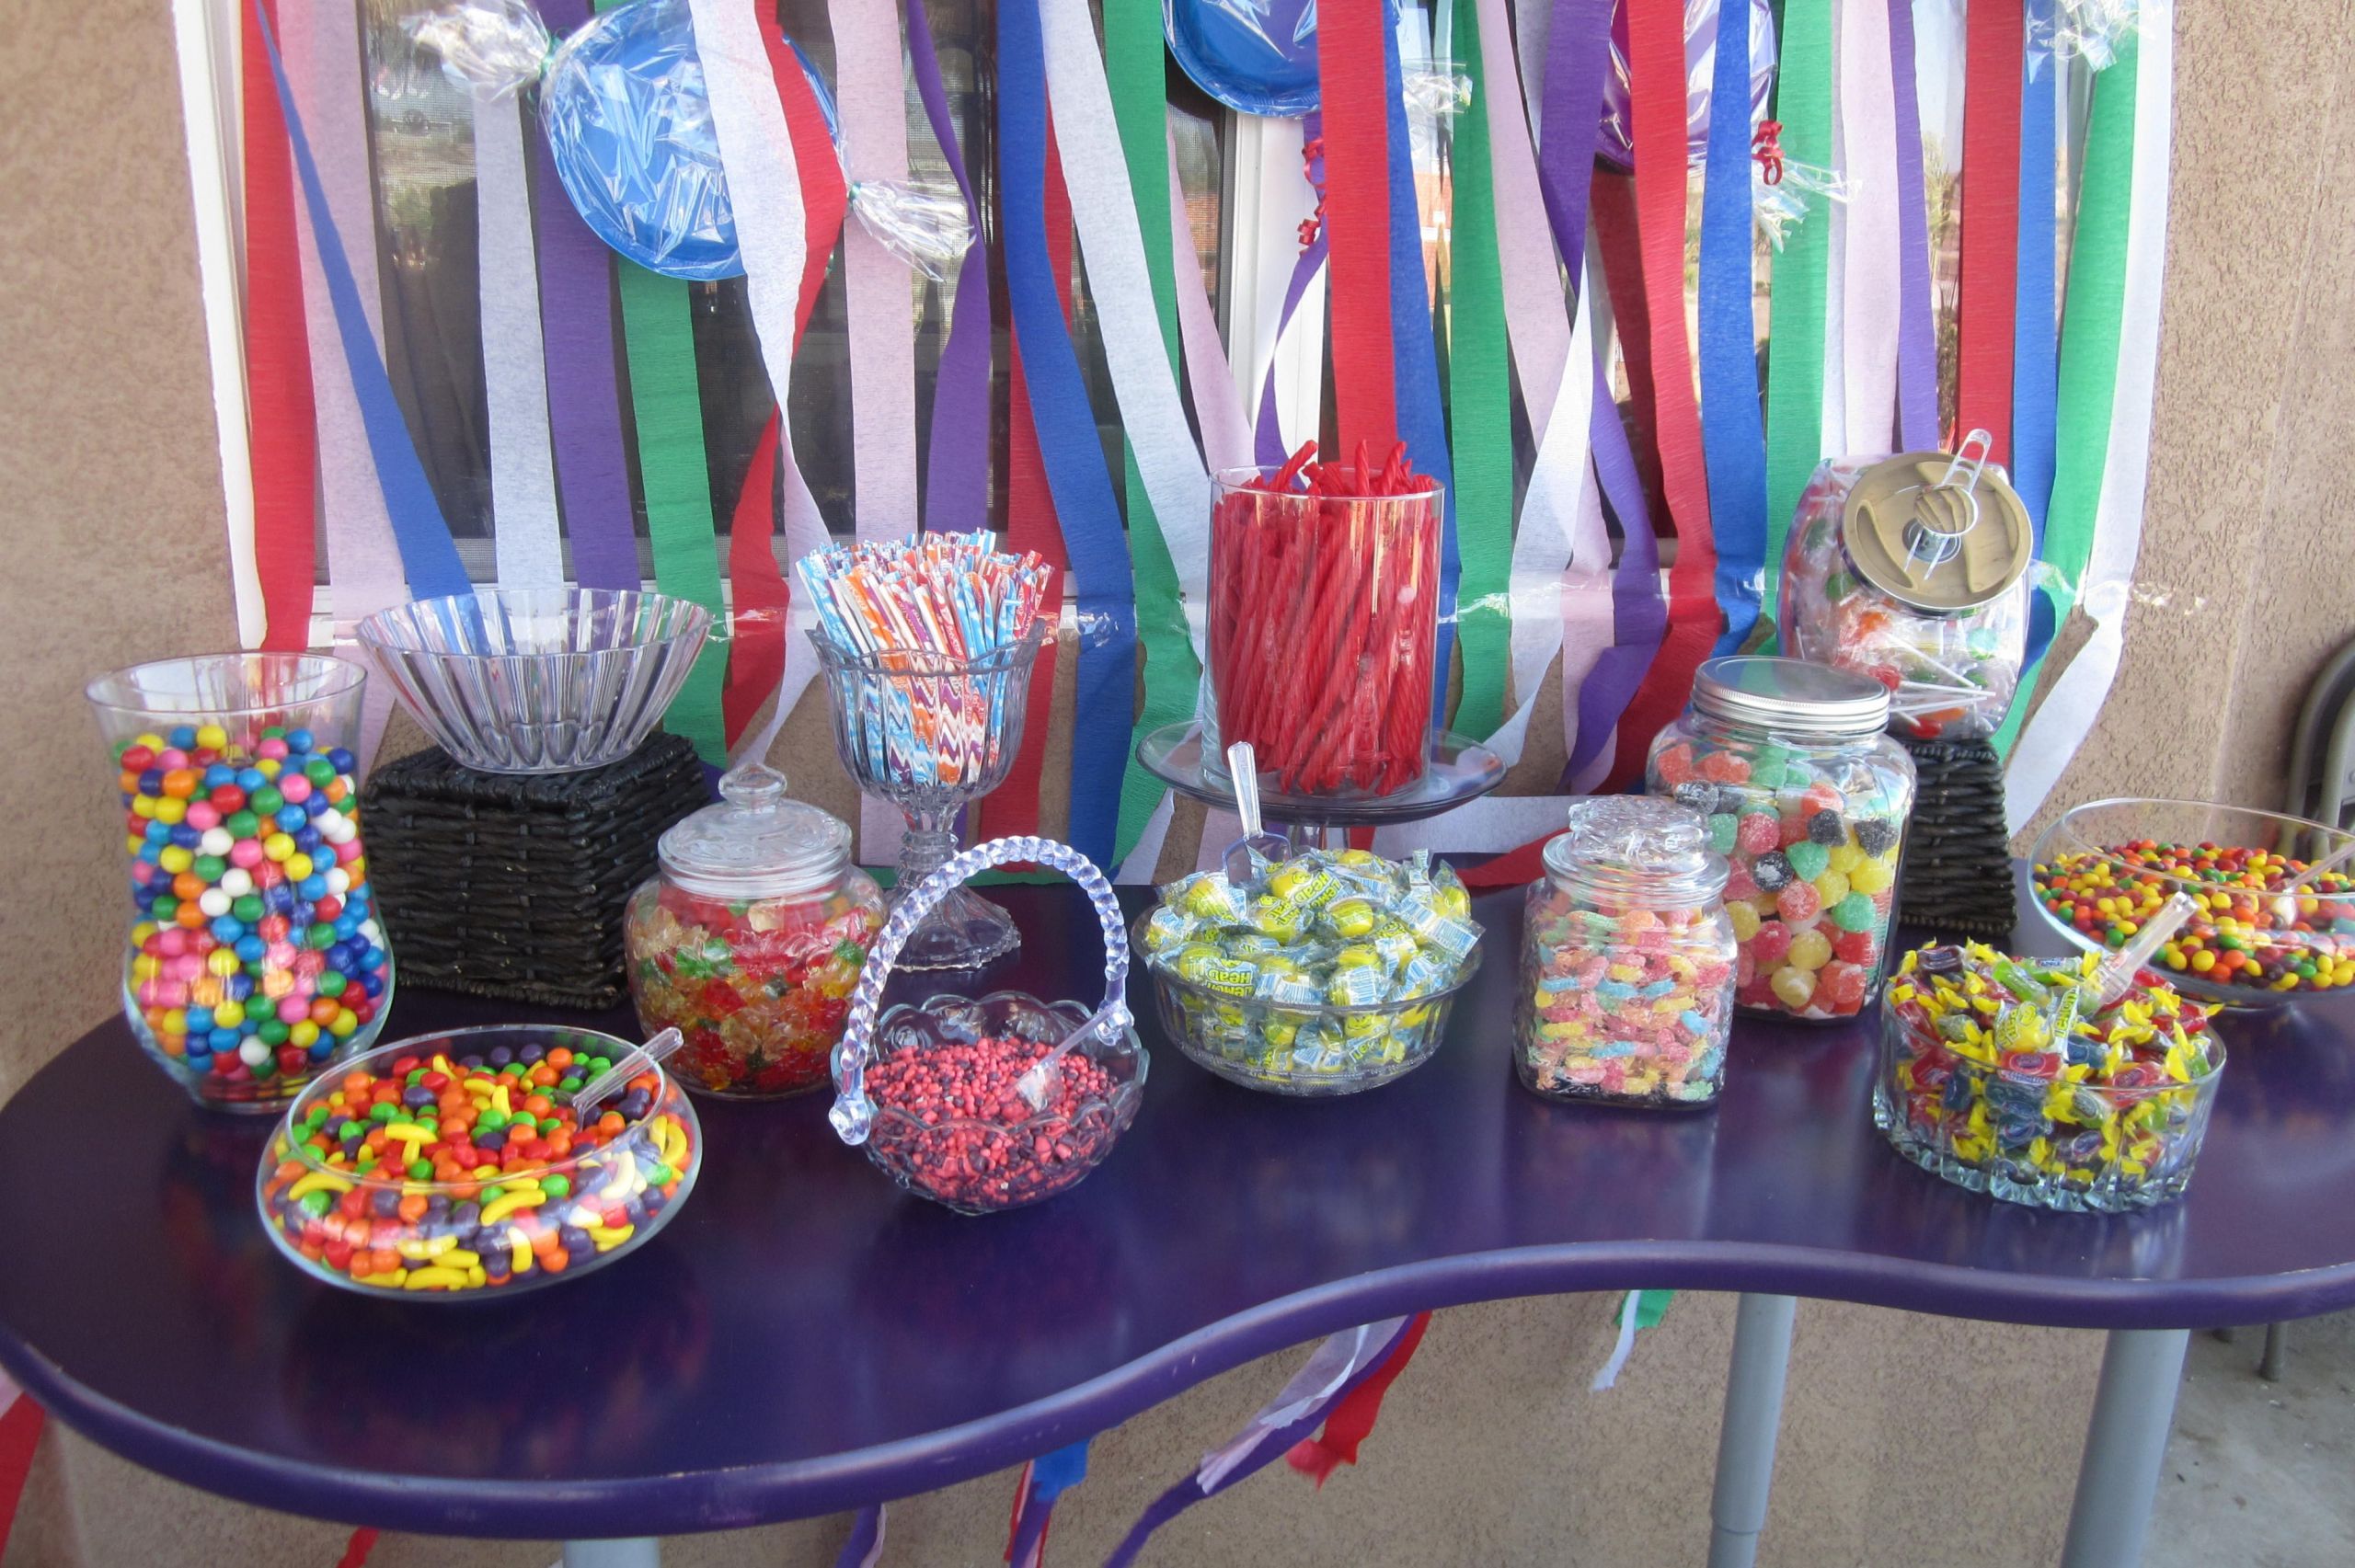 Candy Buffet Ideas For Graduation Party
 Graduation Party Candy Bar